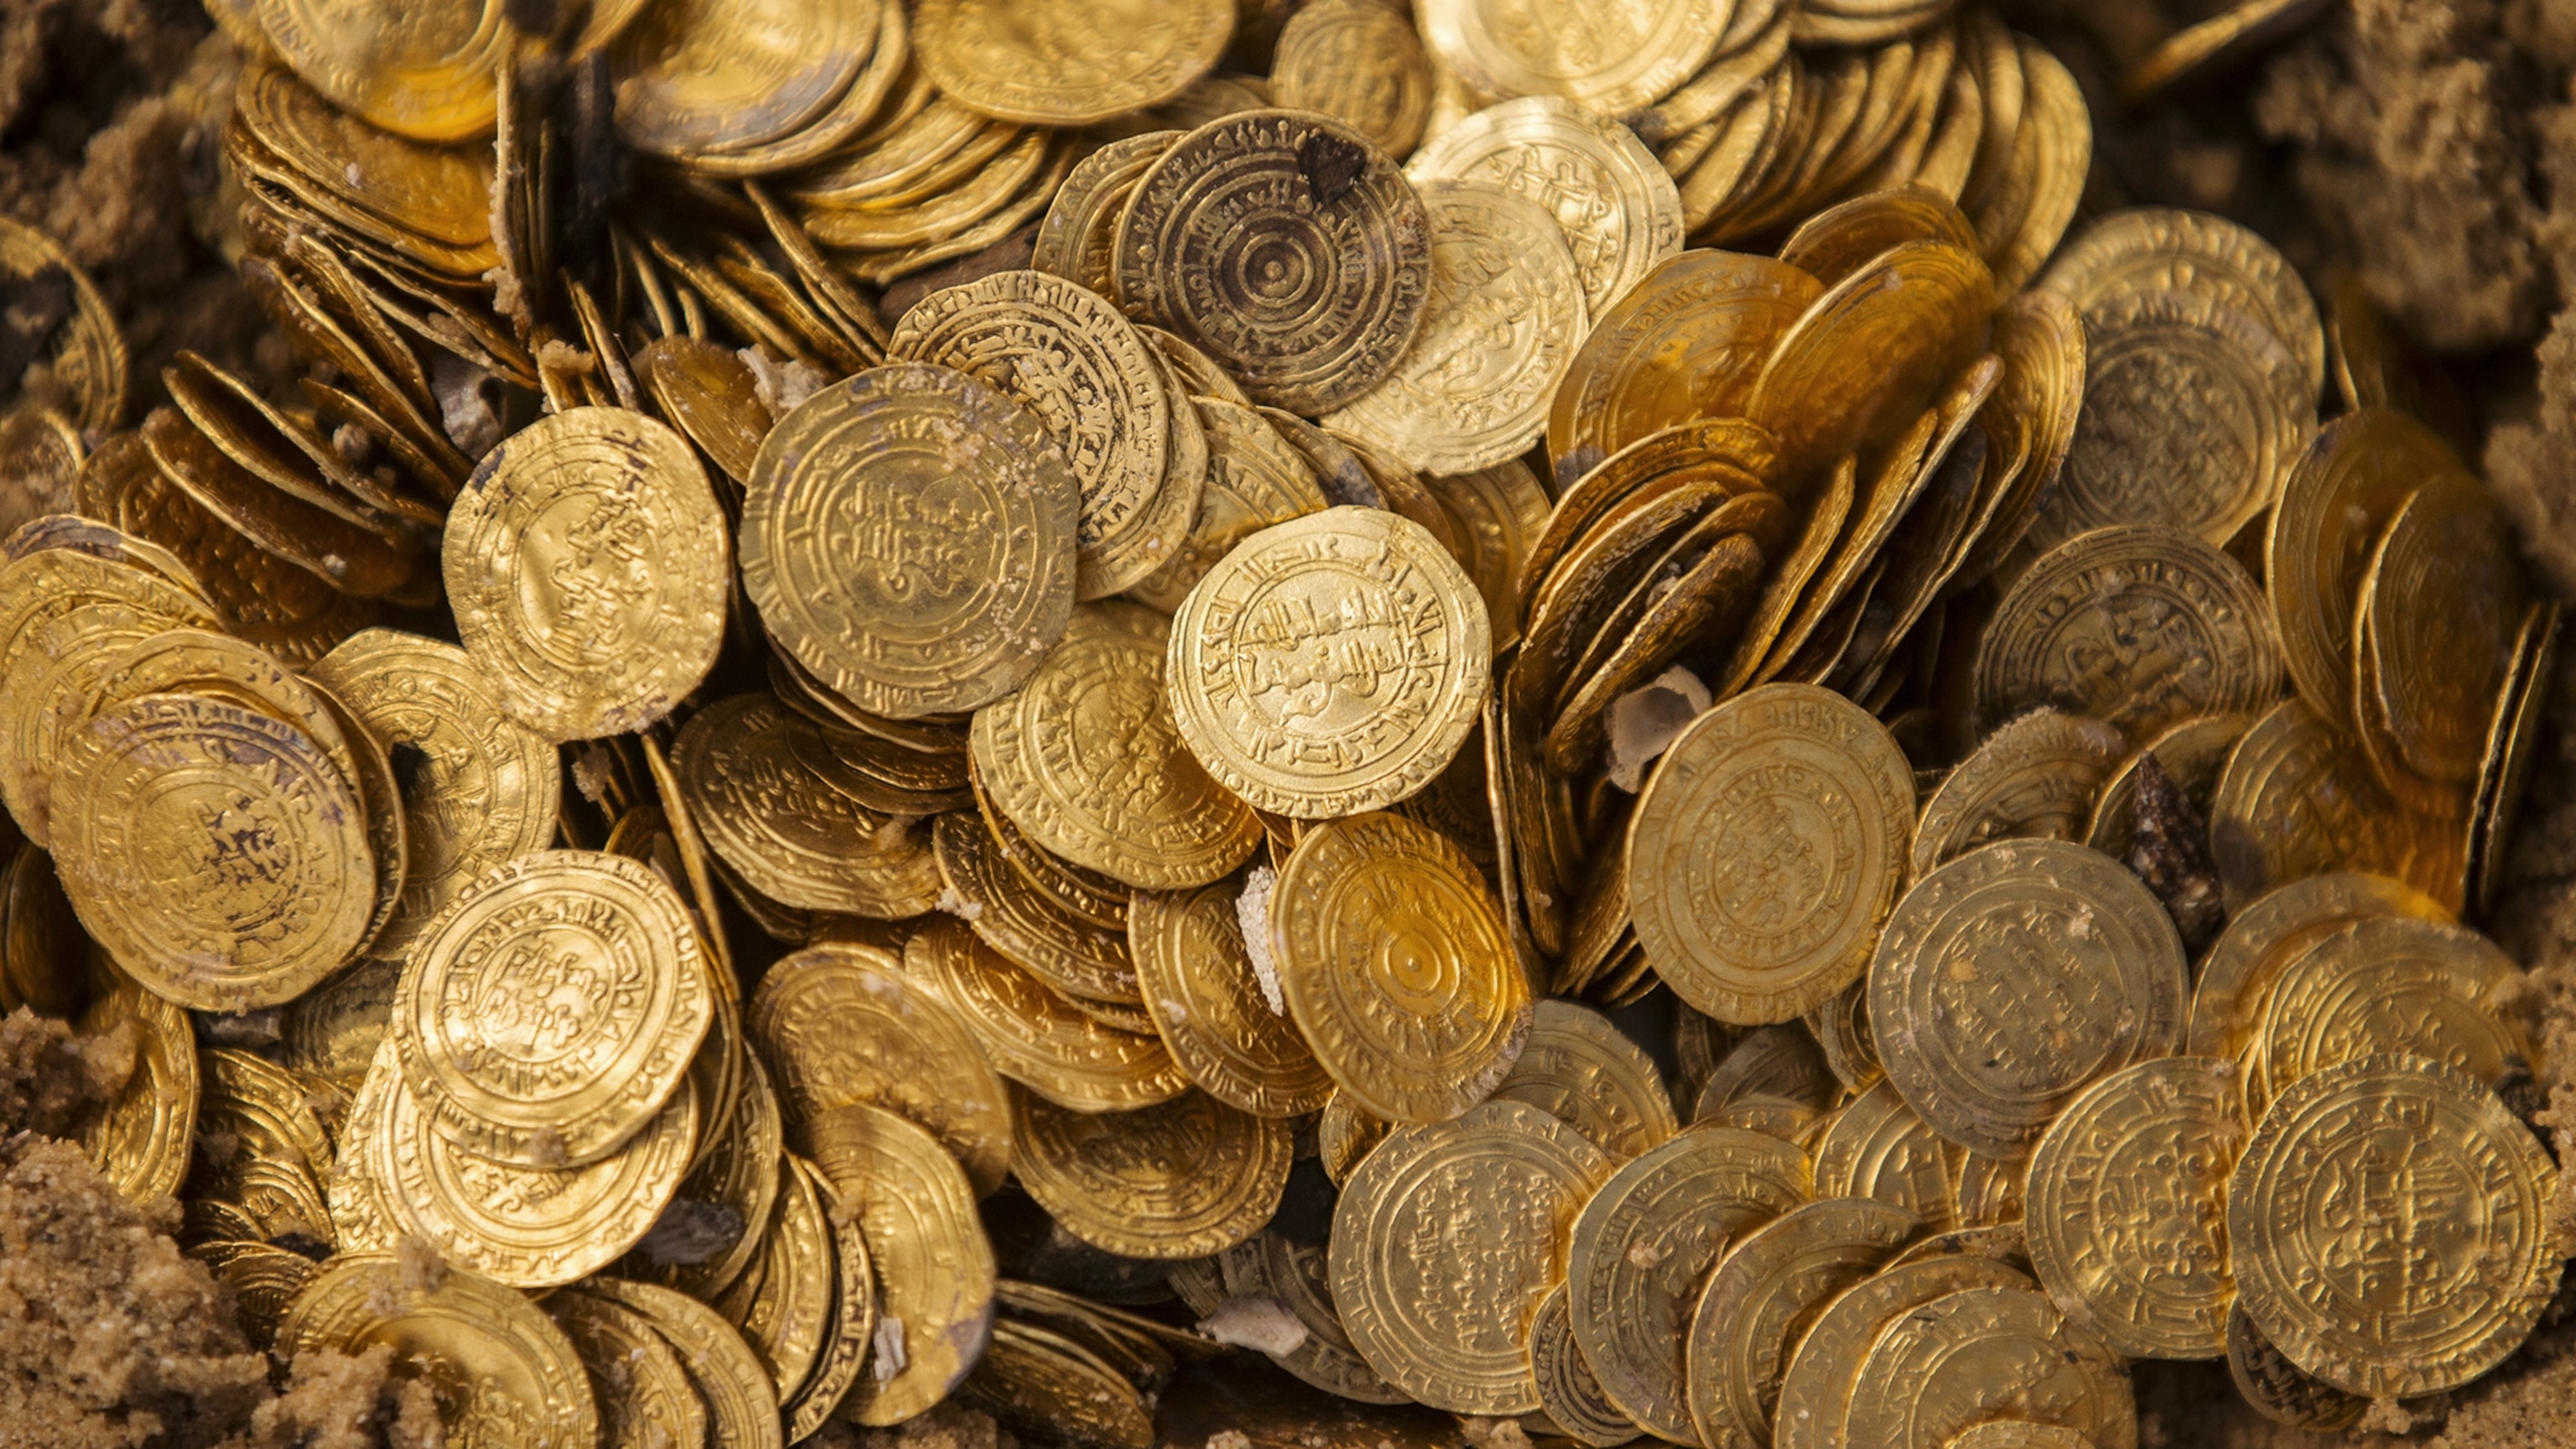 Rare gold coin bought 'on a whim' to sell for $k at auction